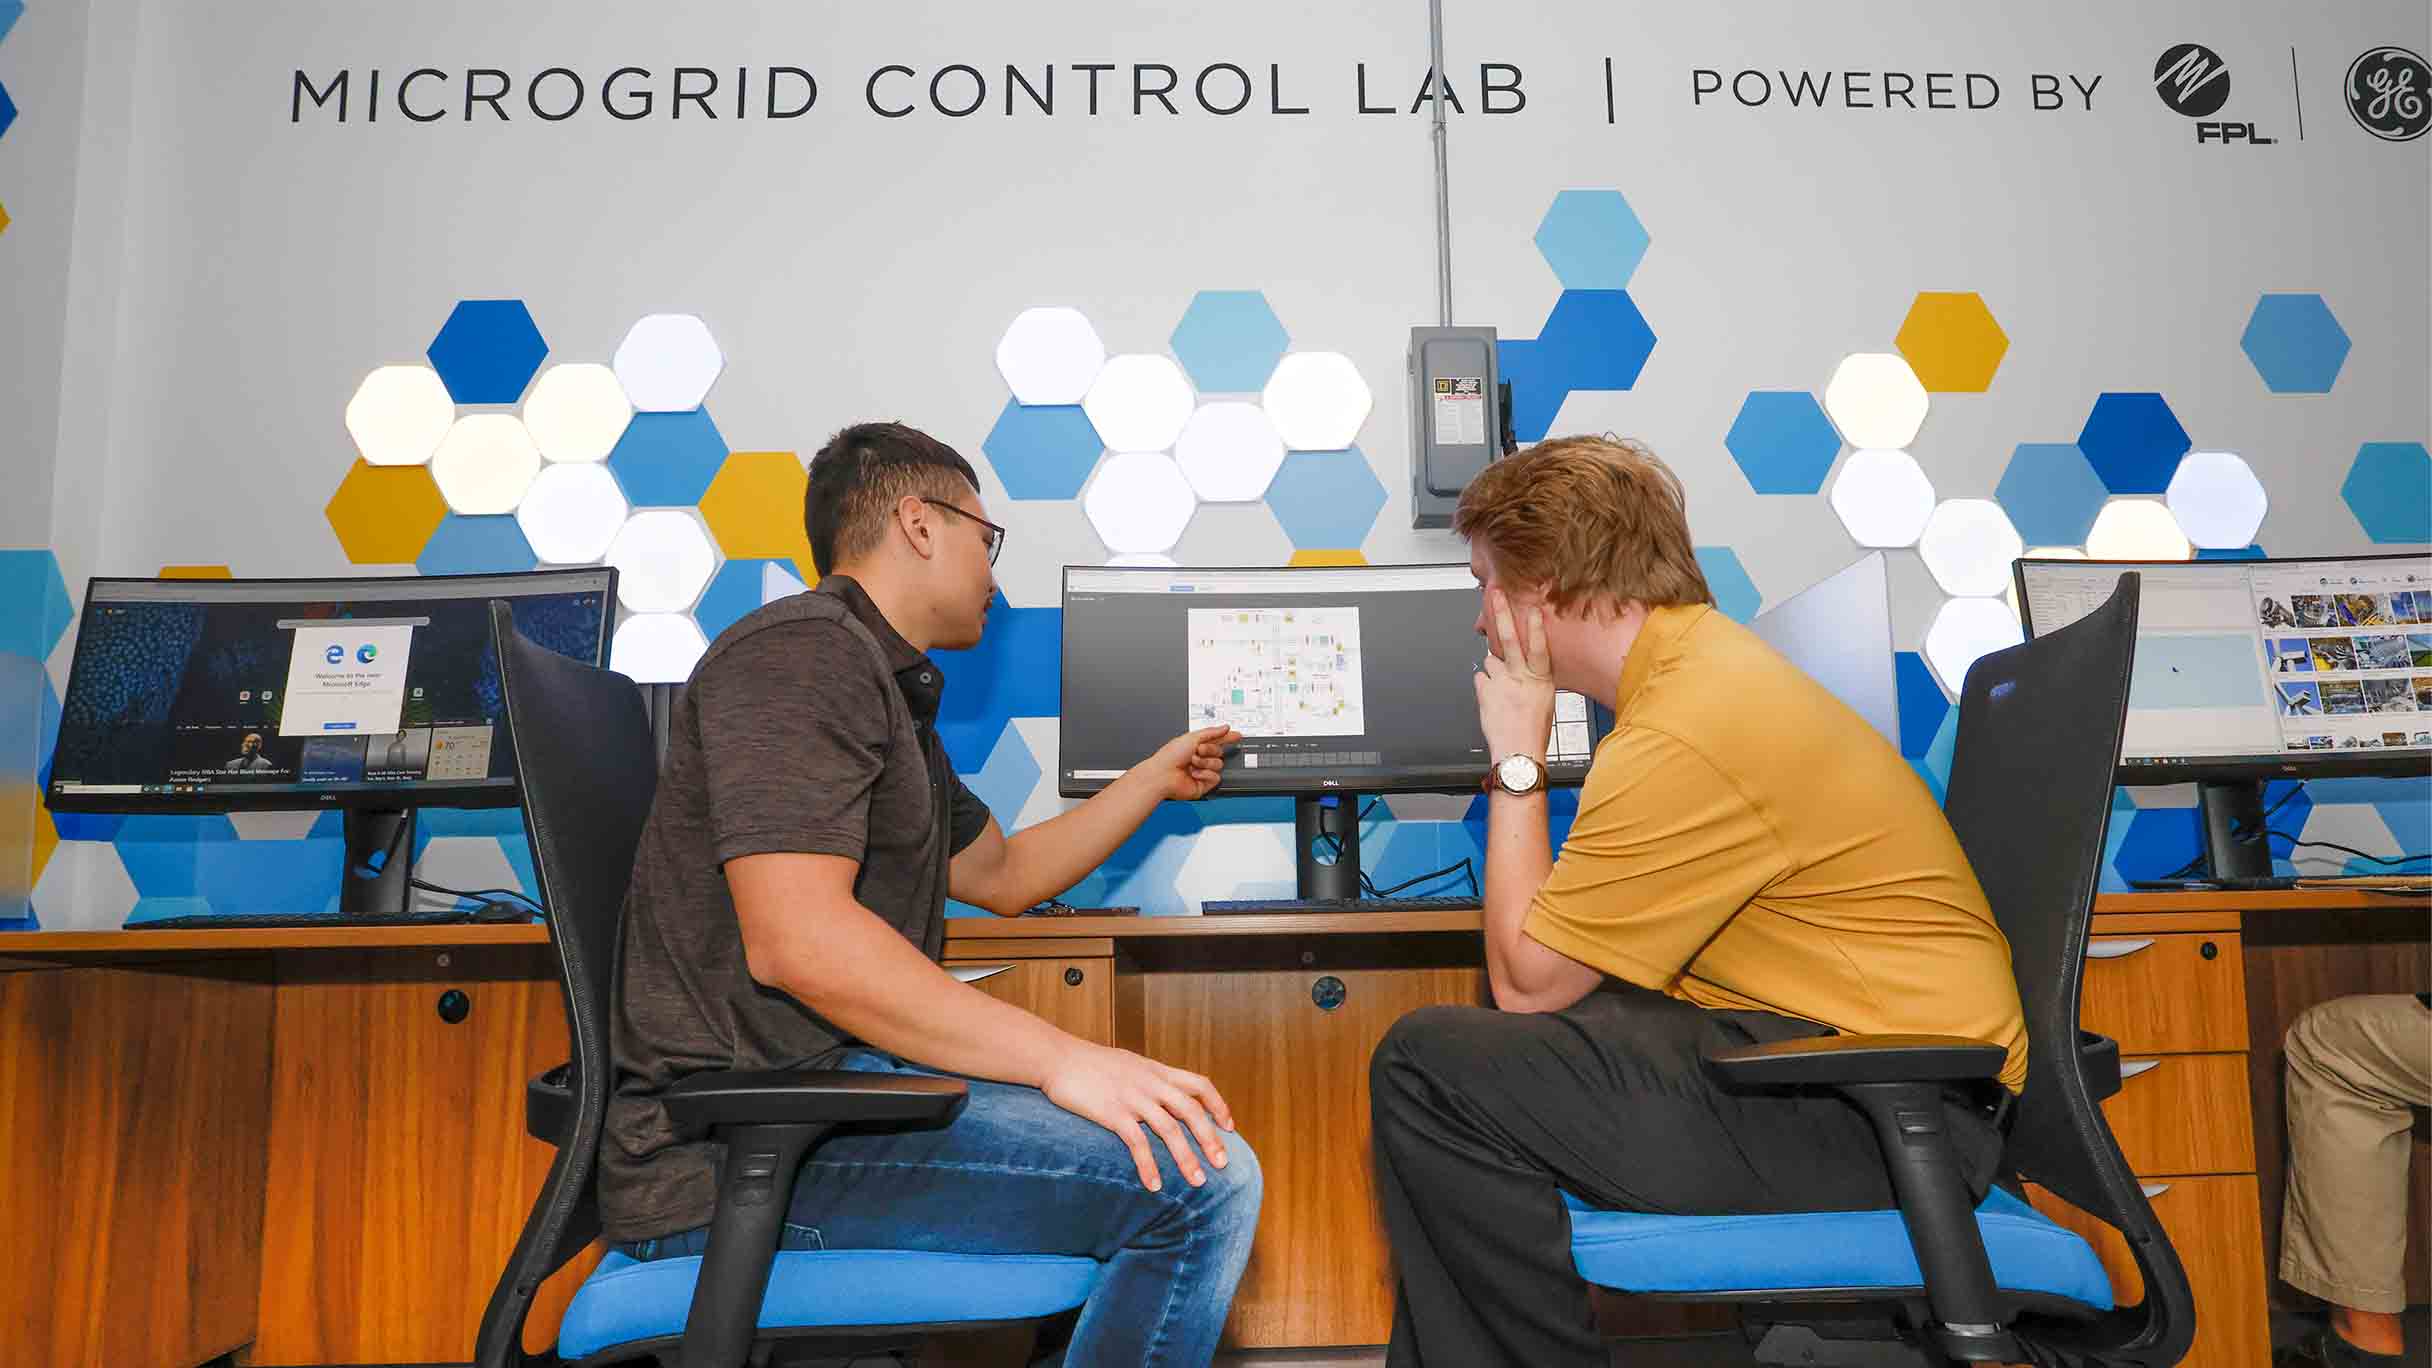 The UCF Microgrid Control Lab simulates the control center of a microgrid, a type of self-sufficient energy system